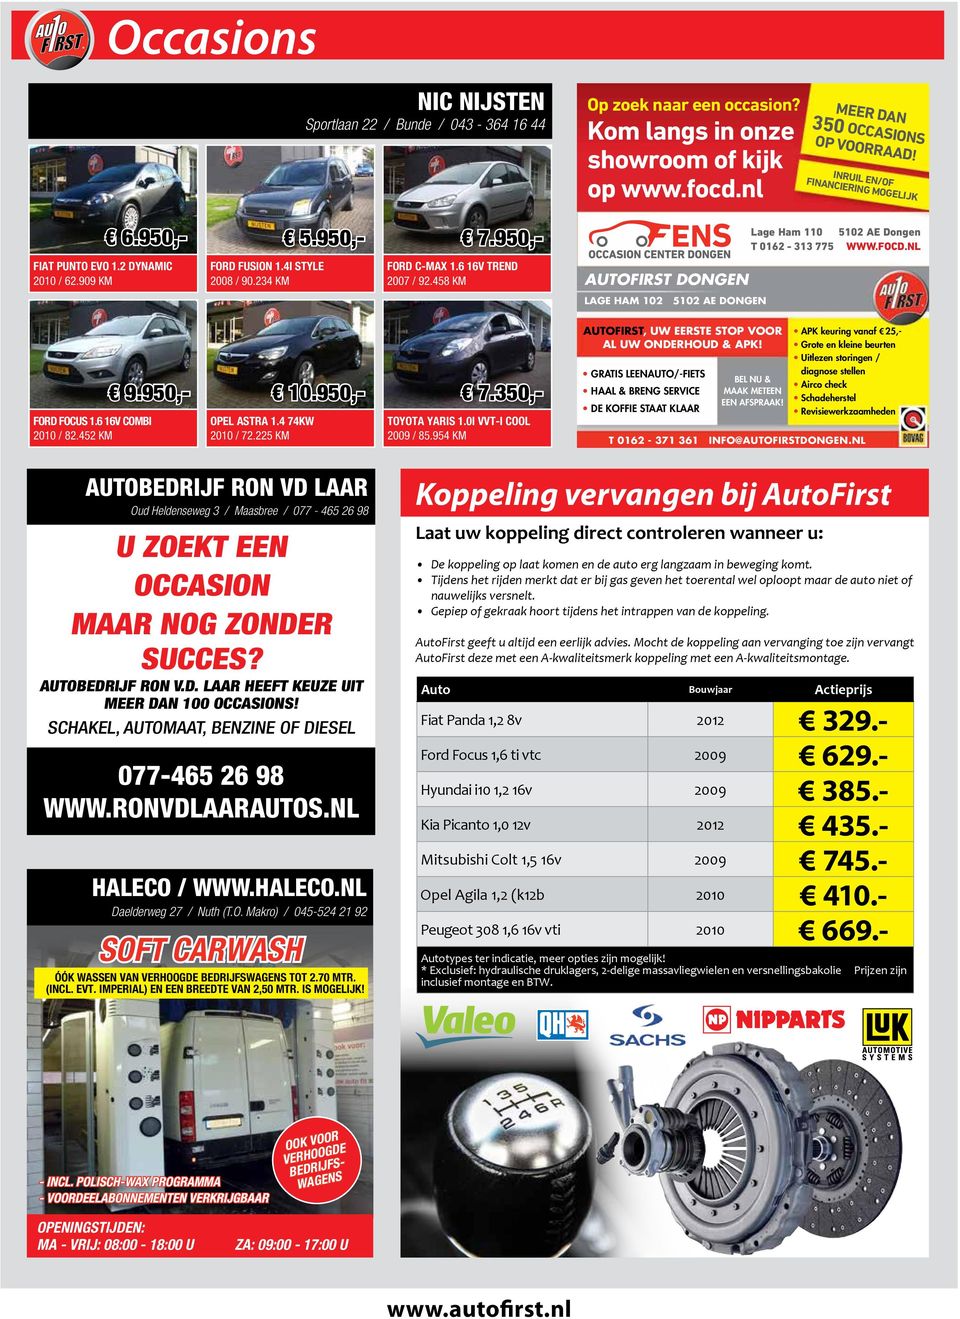 6 V REND 2007 / 92.458 KM AUOFIRS DONGEN LAGE AM 102 5102 AE DONGEN 9.950, FORD FOCUS 1.6 V COMBI 2010 / 82.452 KM OPEL ASRA 1.4 74KW 2010 / 72.225 KM 10.950, 7.350, OYOA YARIS 1.